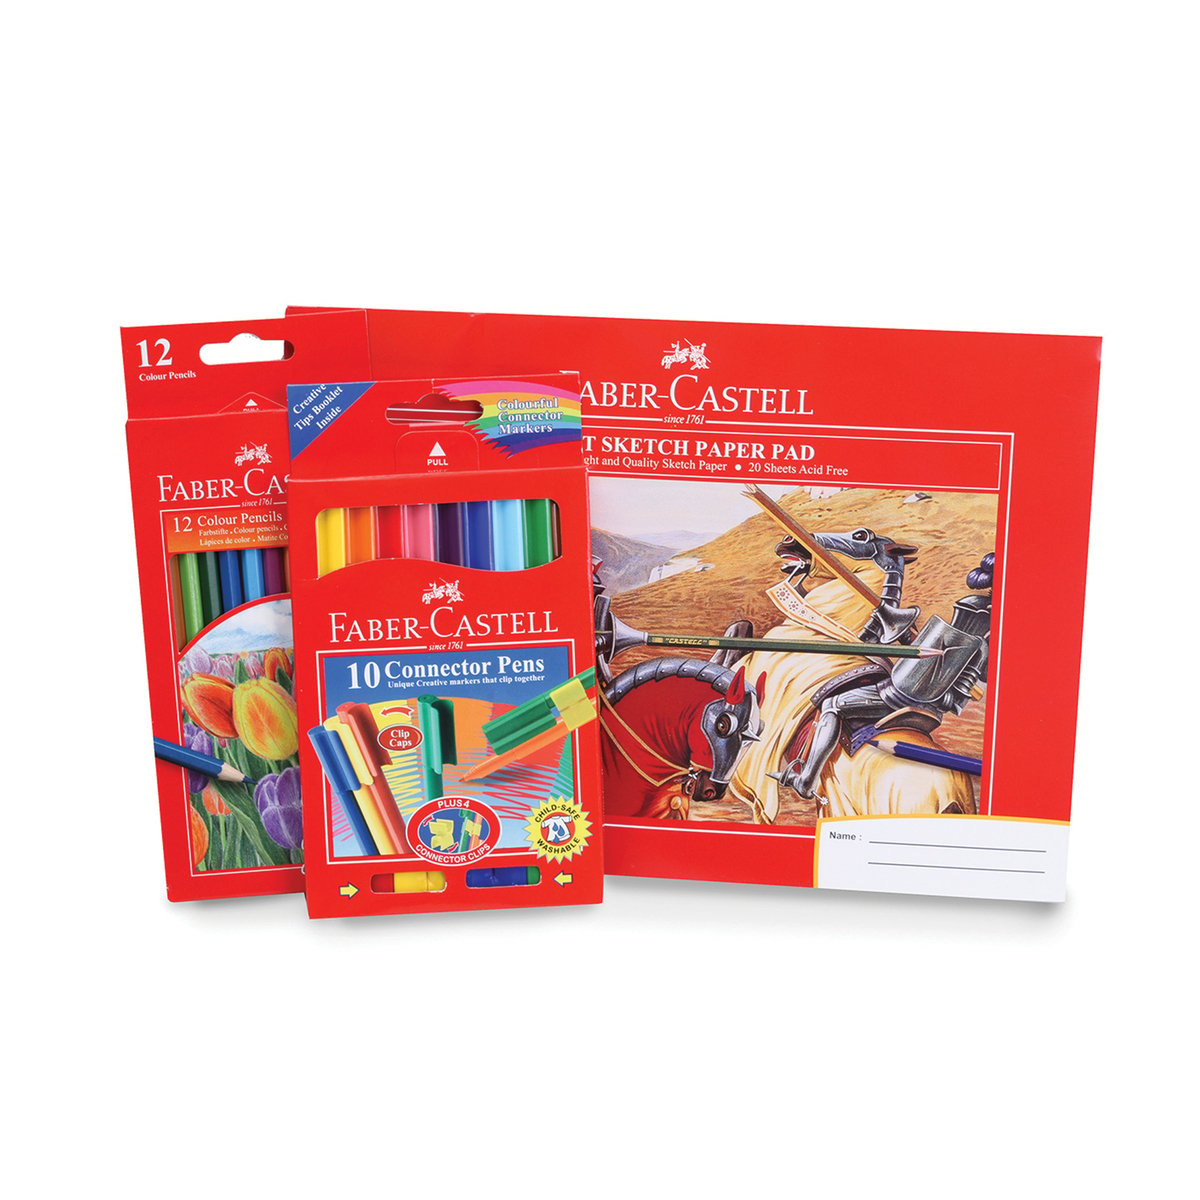 Faber-Castell Drawing Book + Connector Pen + Color Pencil